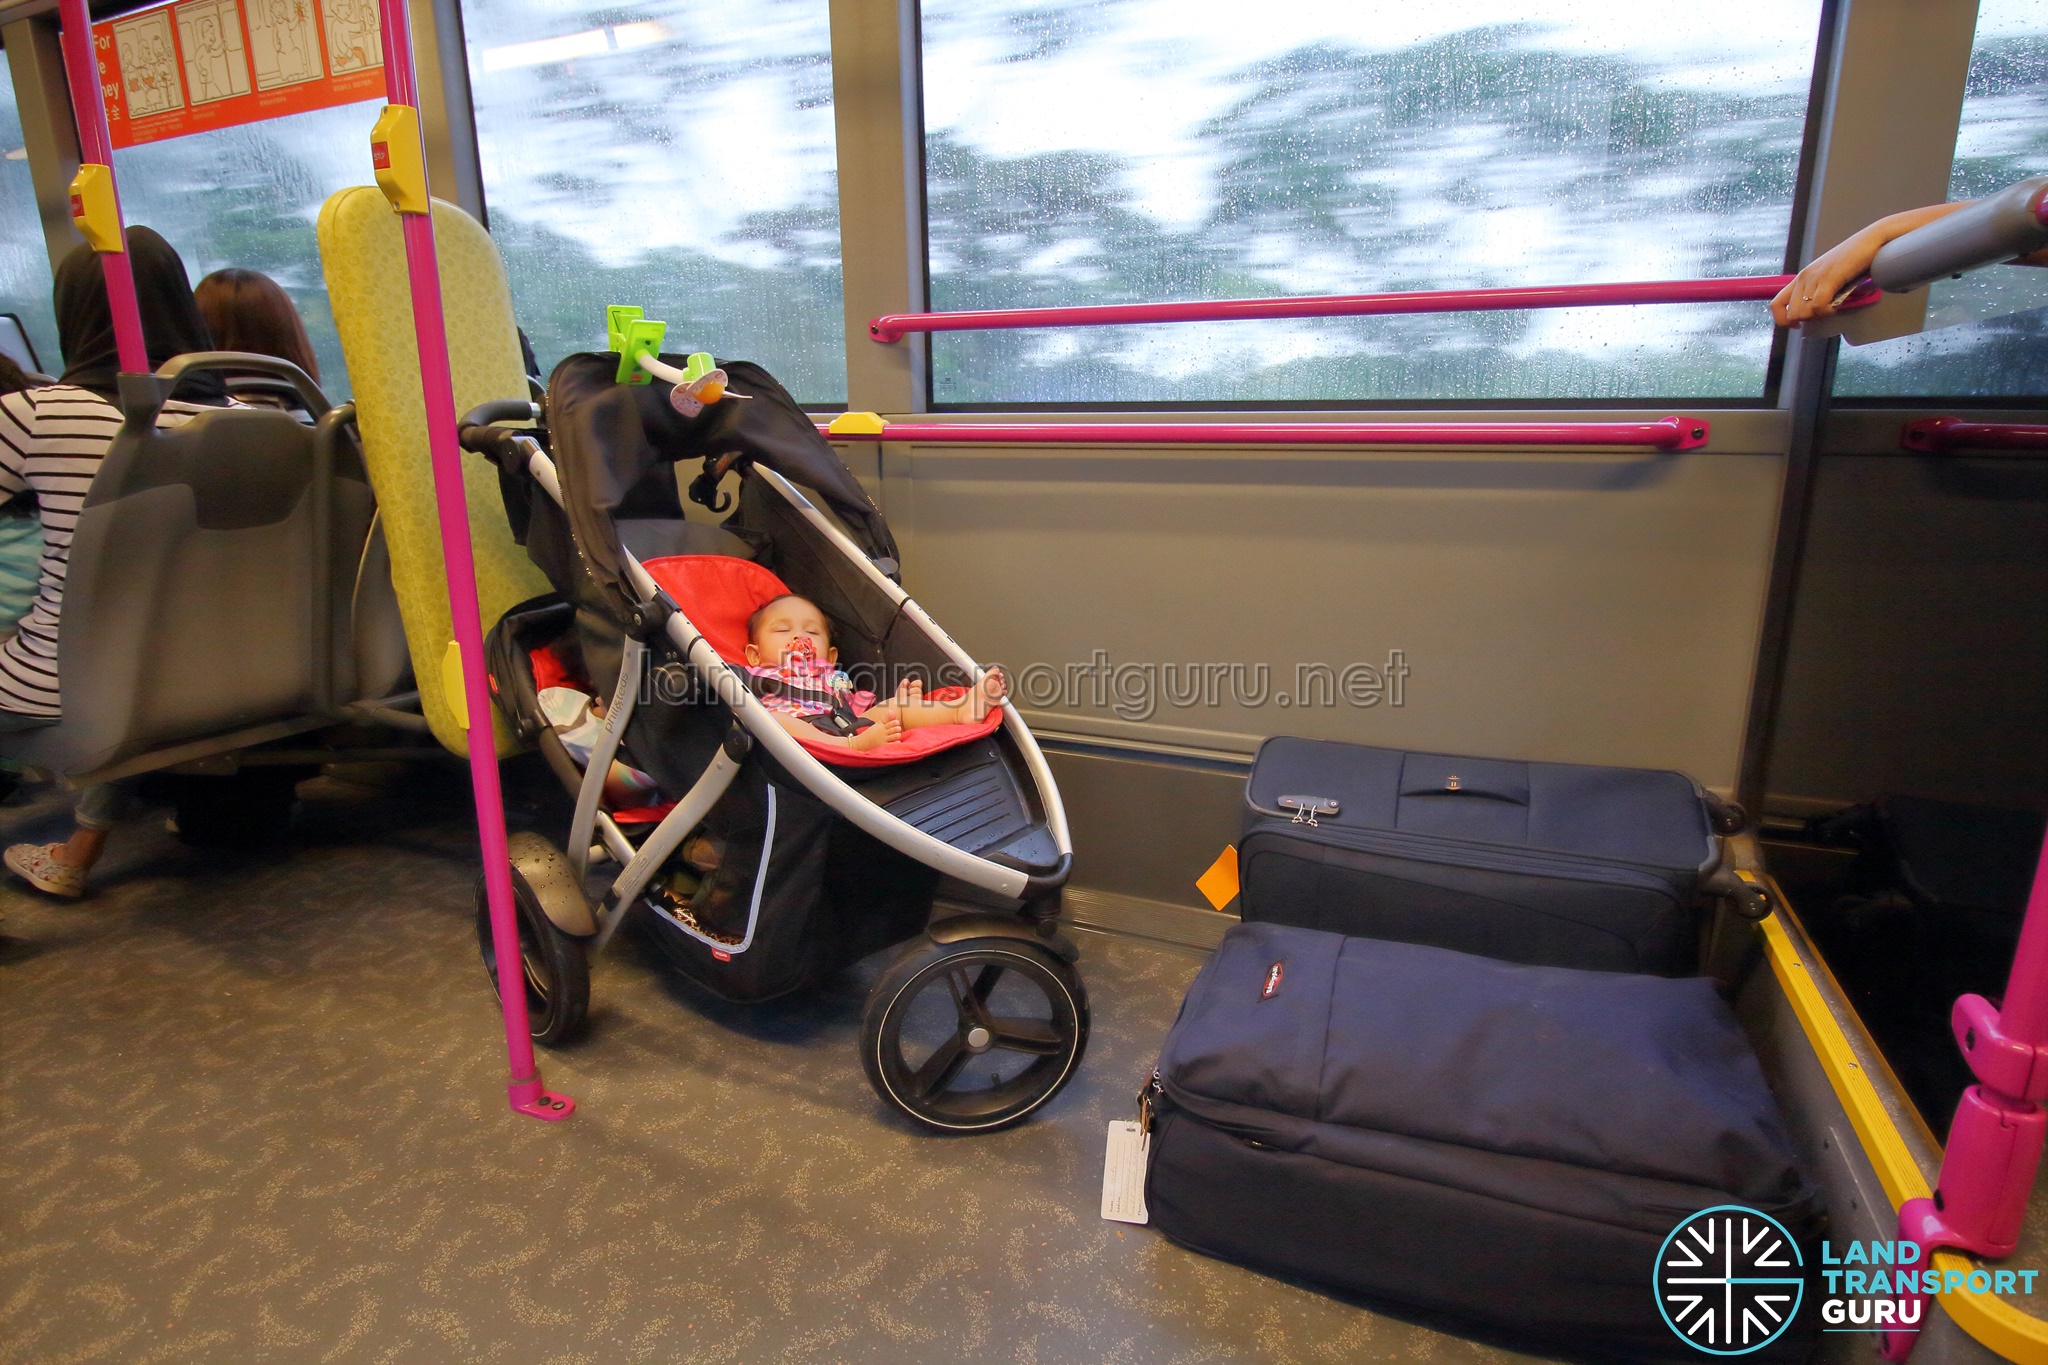 Open prams are allowed on public buses